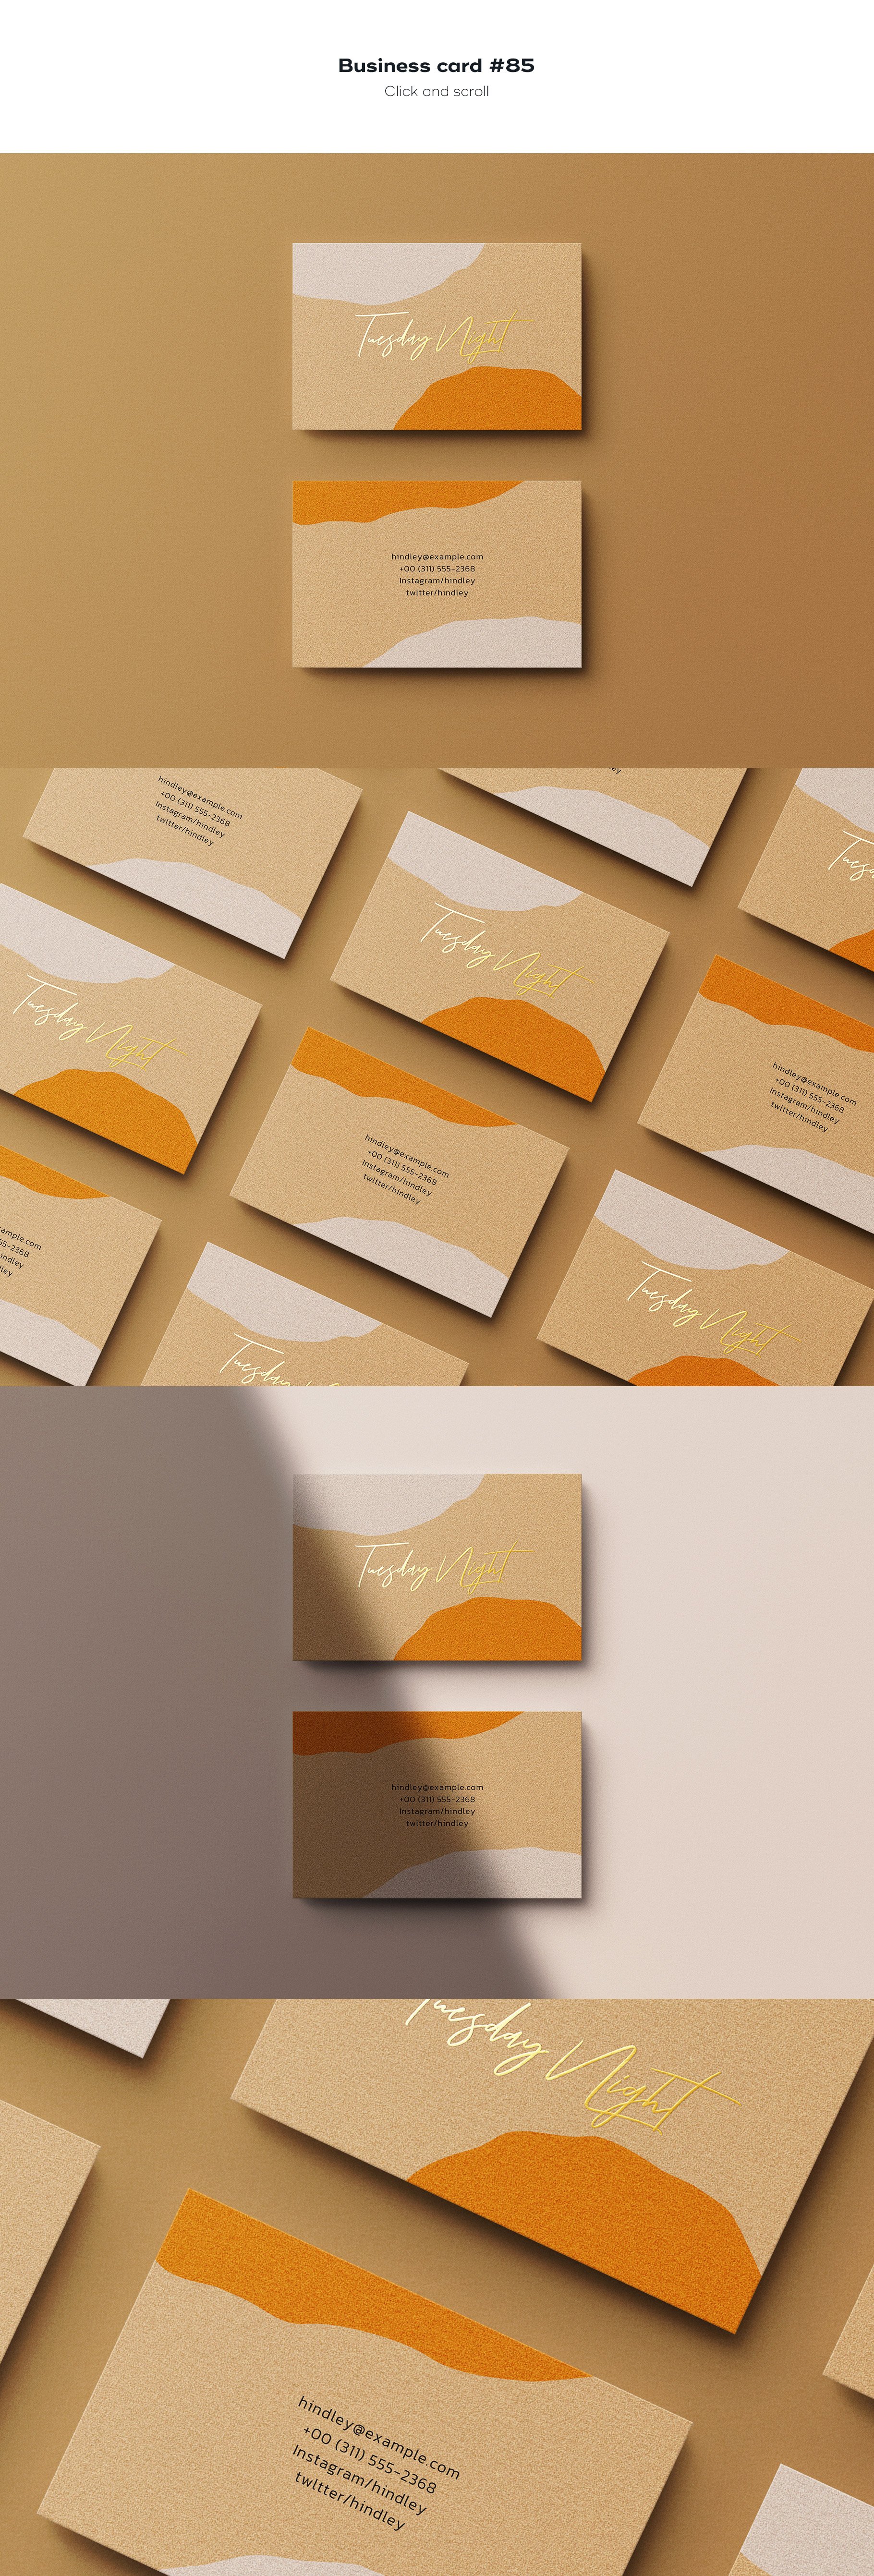 business card 85 674